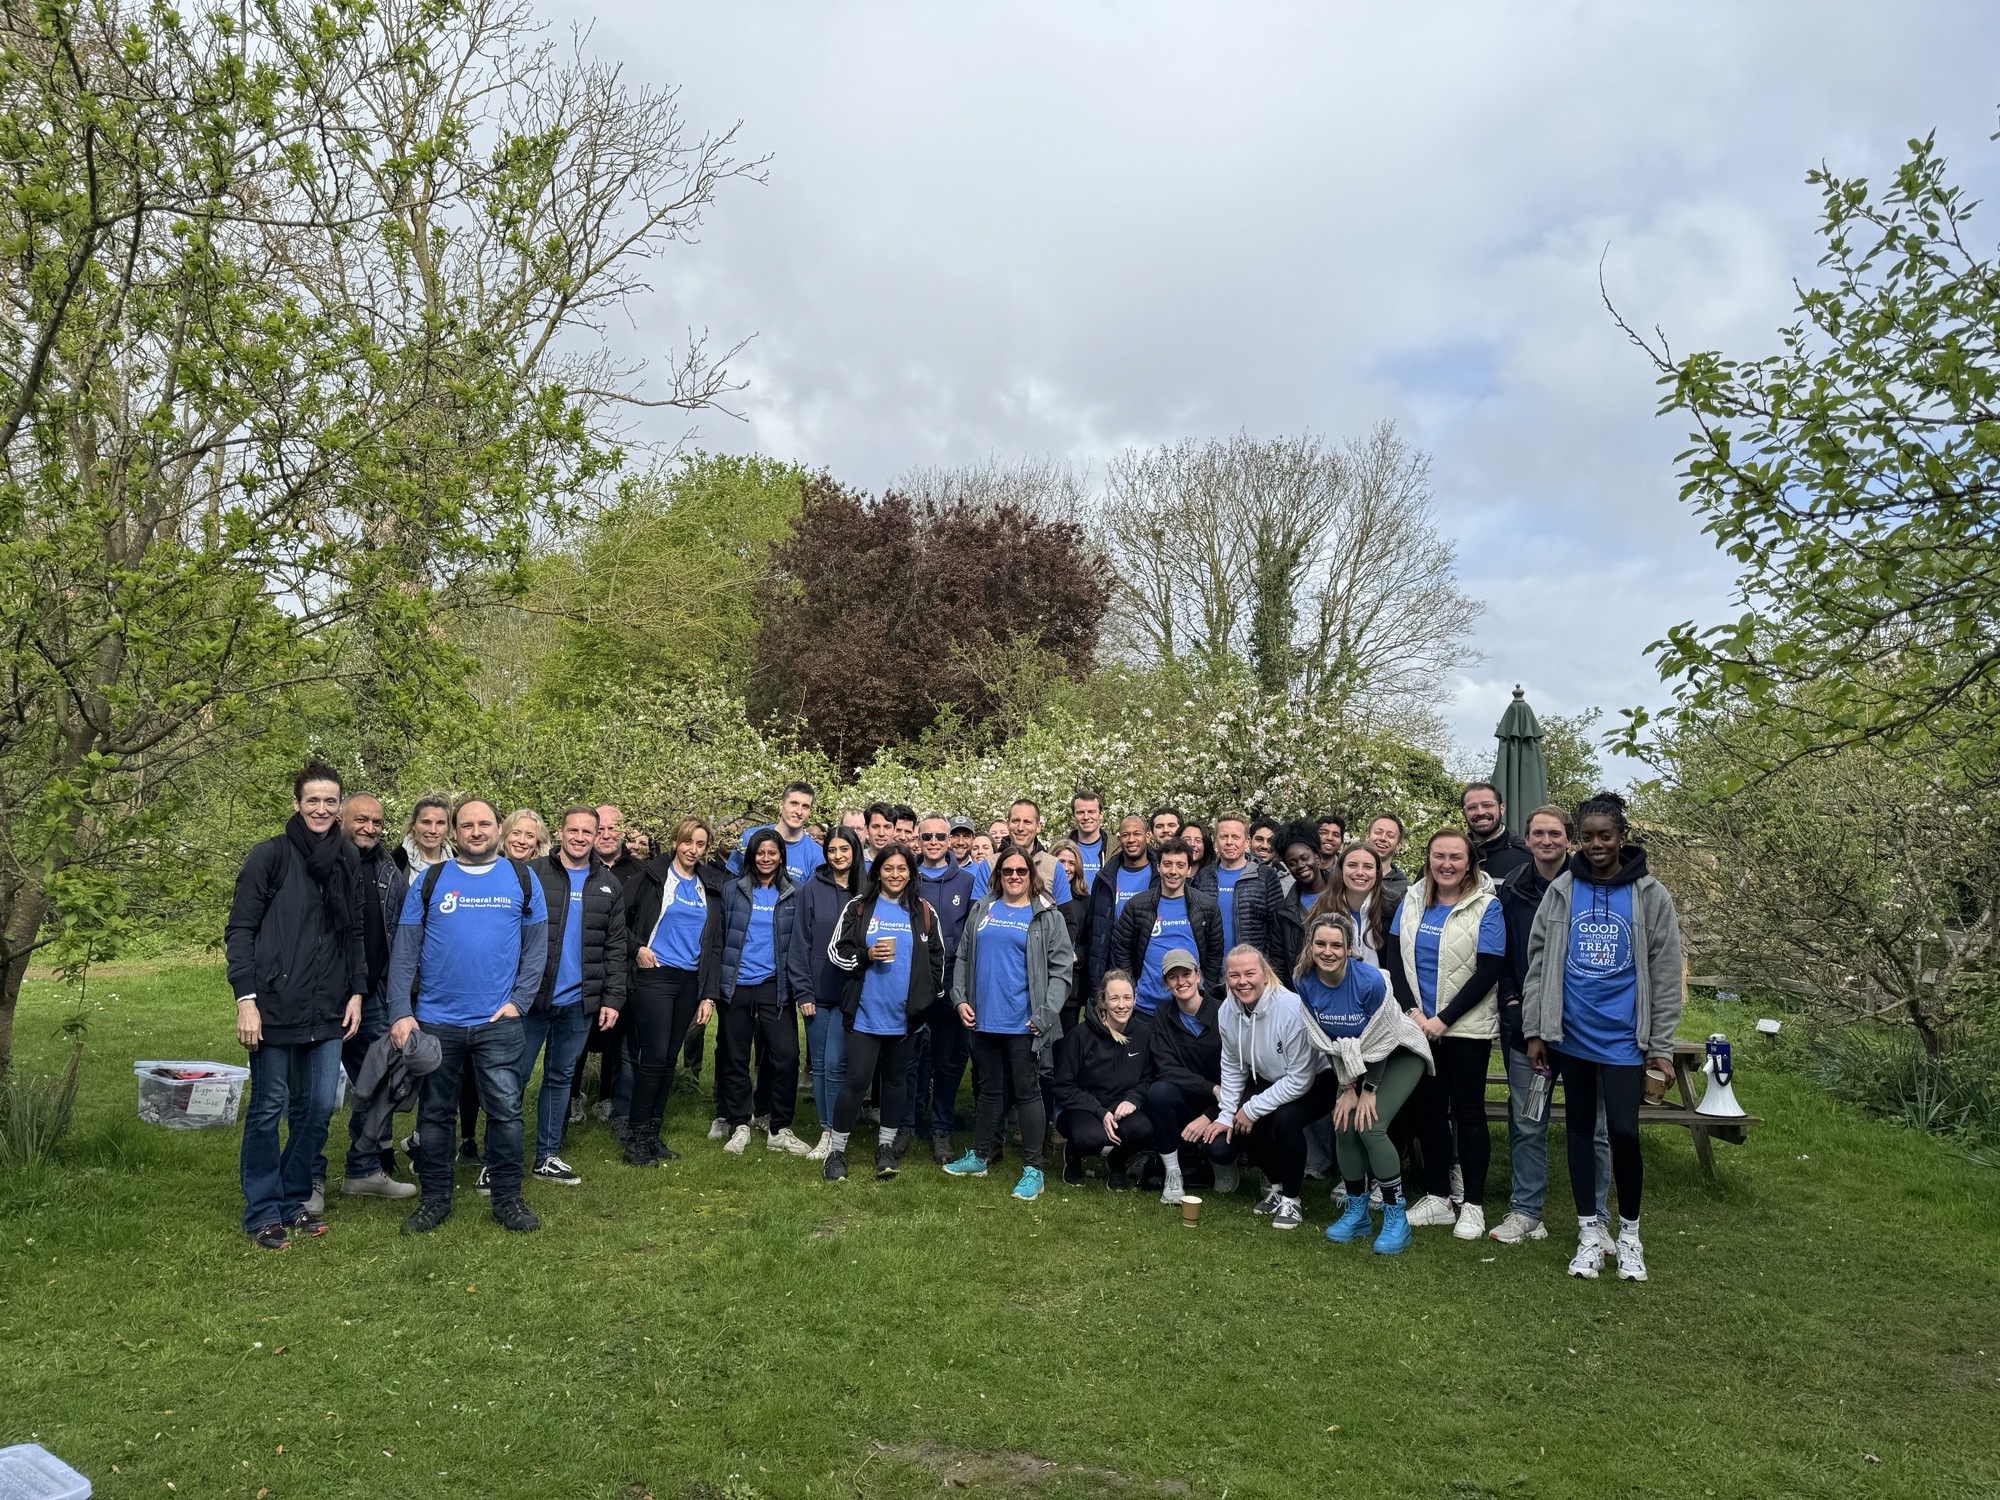 Employees volunteering from a General Mills Europe/Australia location